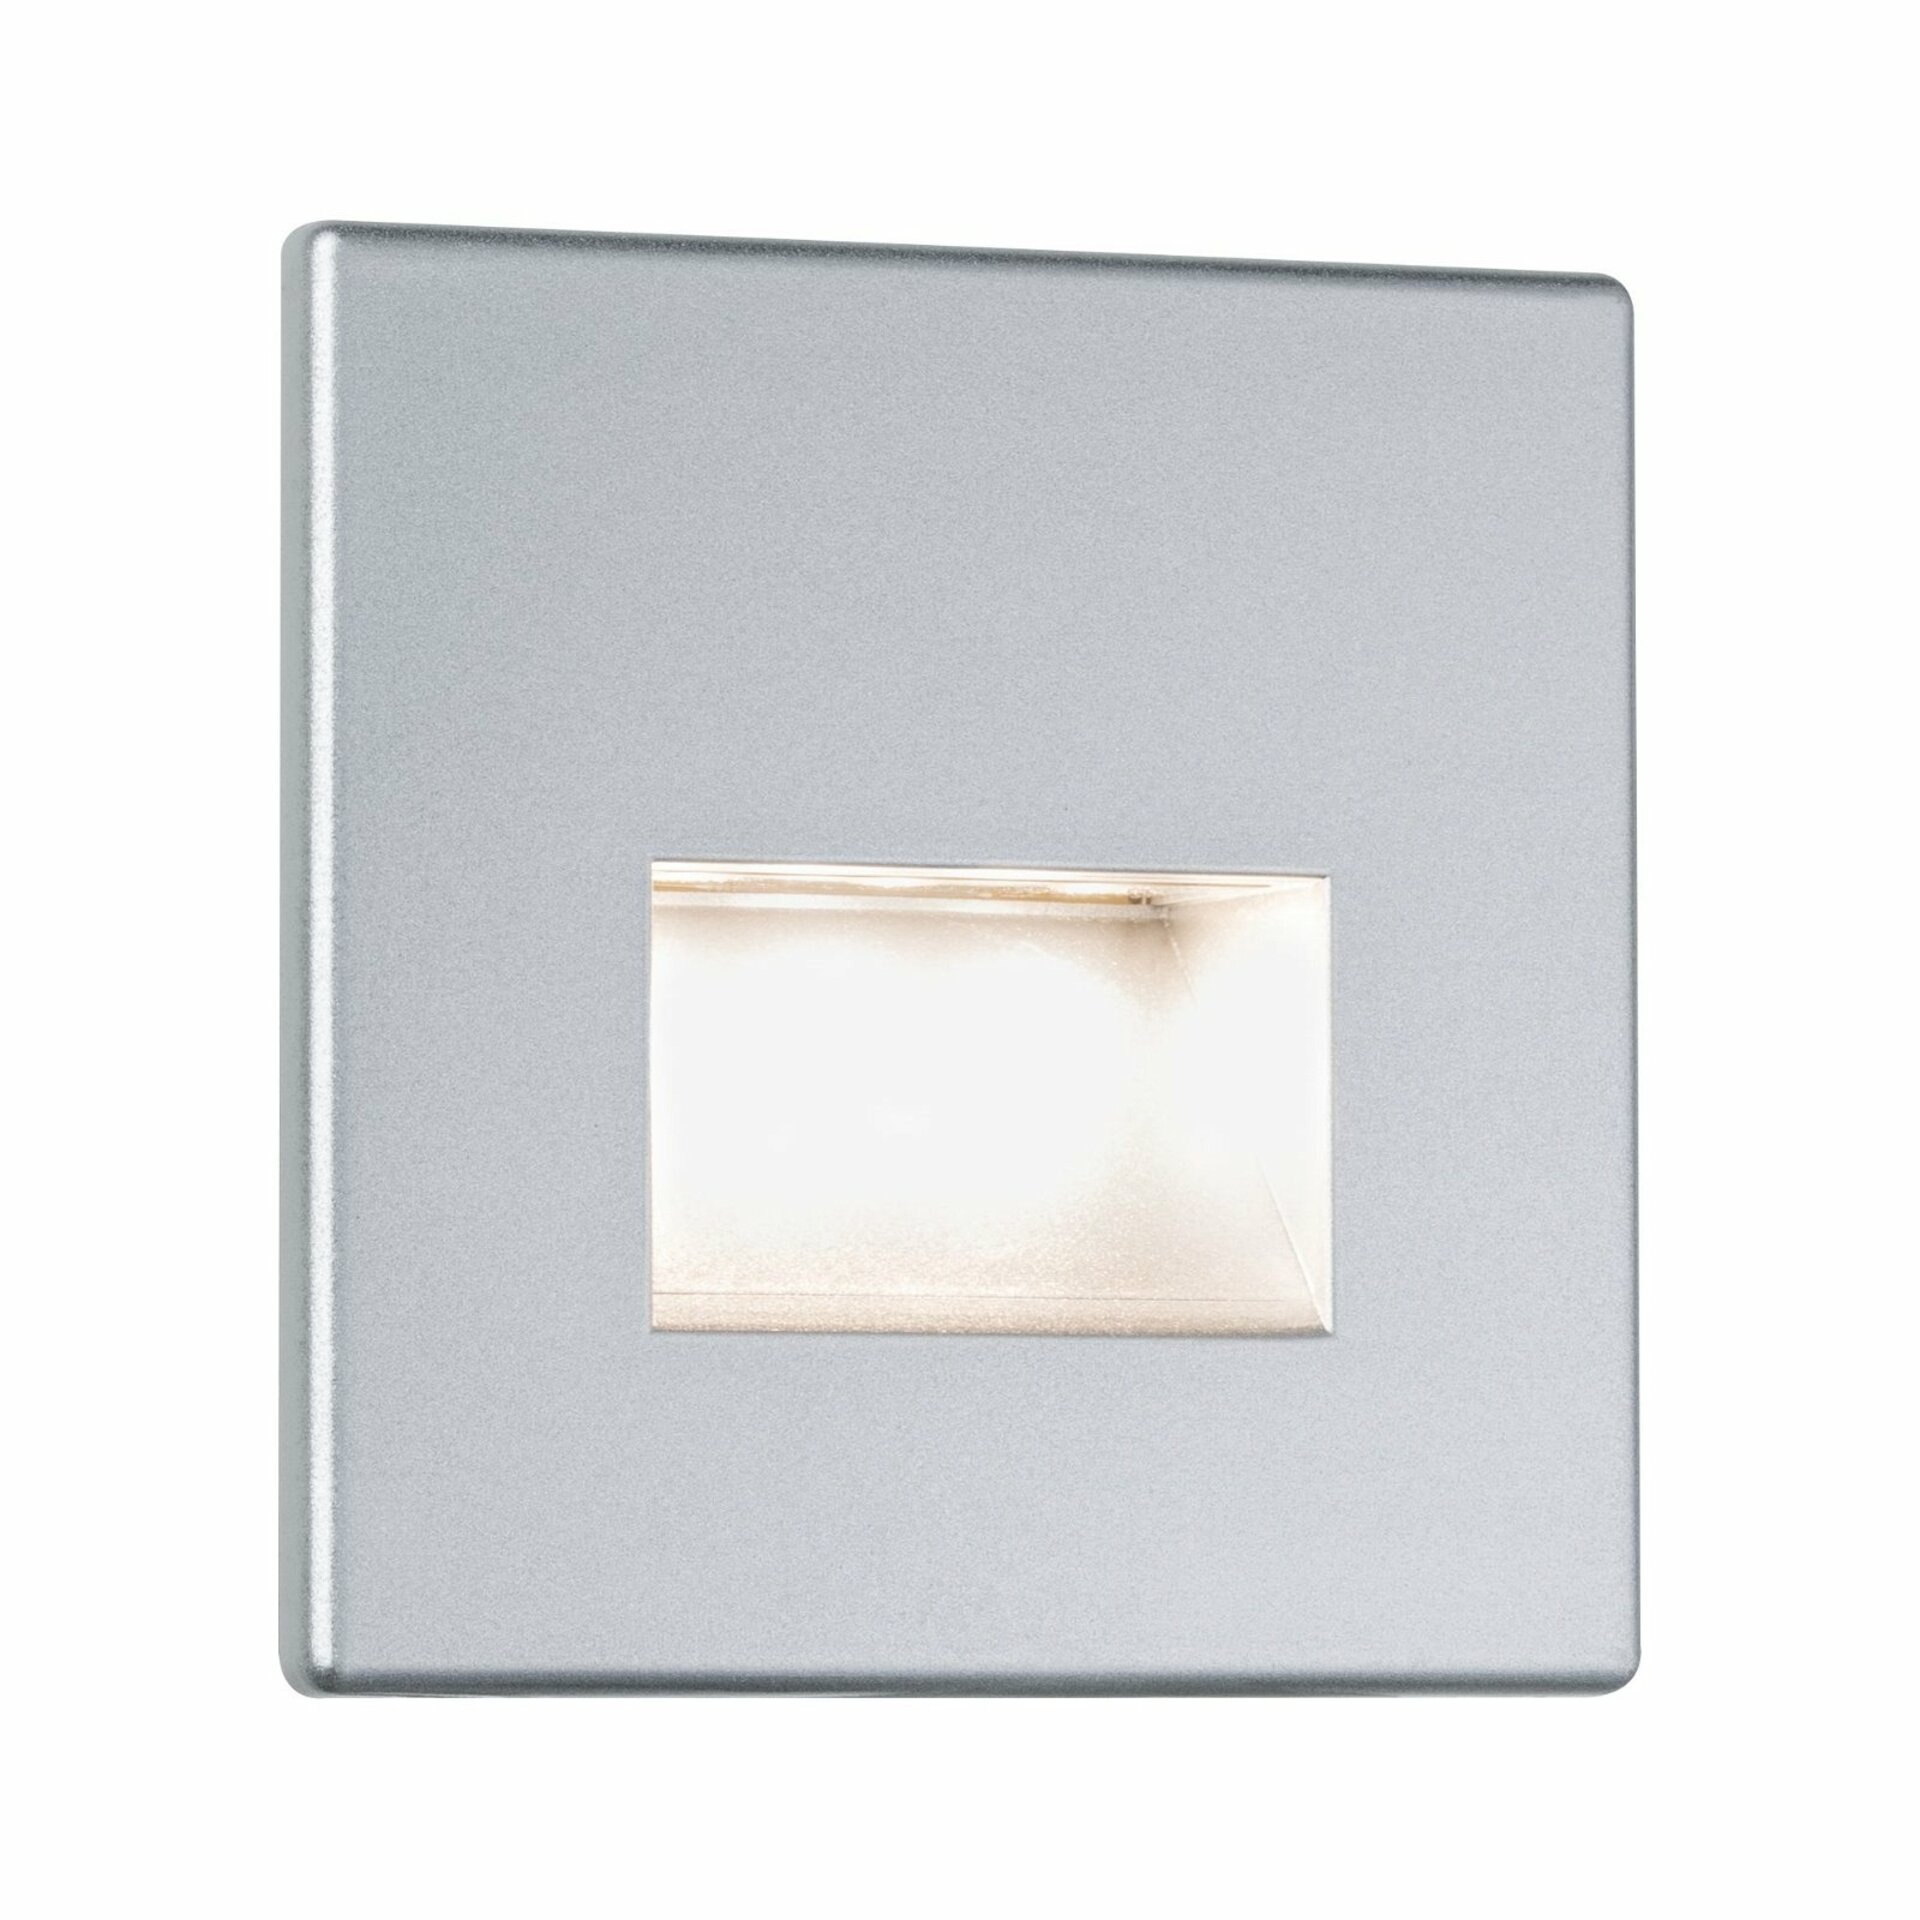 Paulmann 99495 LED recessed orientation light for stairs Wall 1x1.4W | 50lm | 2700K - matte chrome